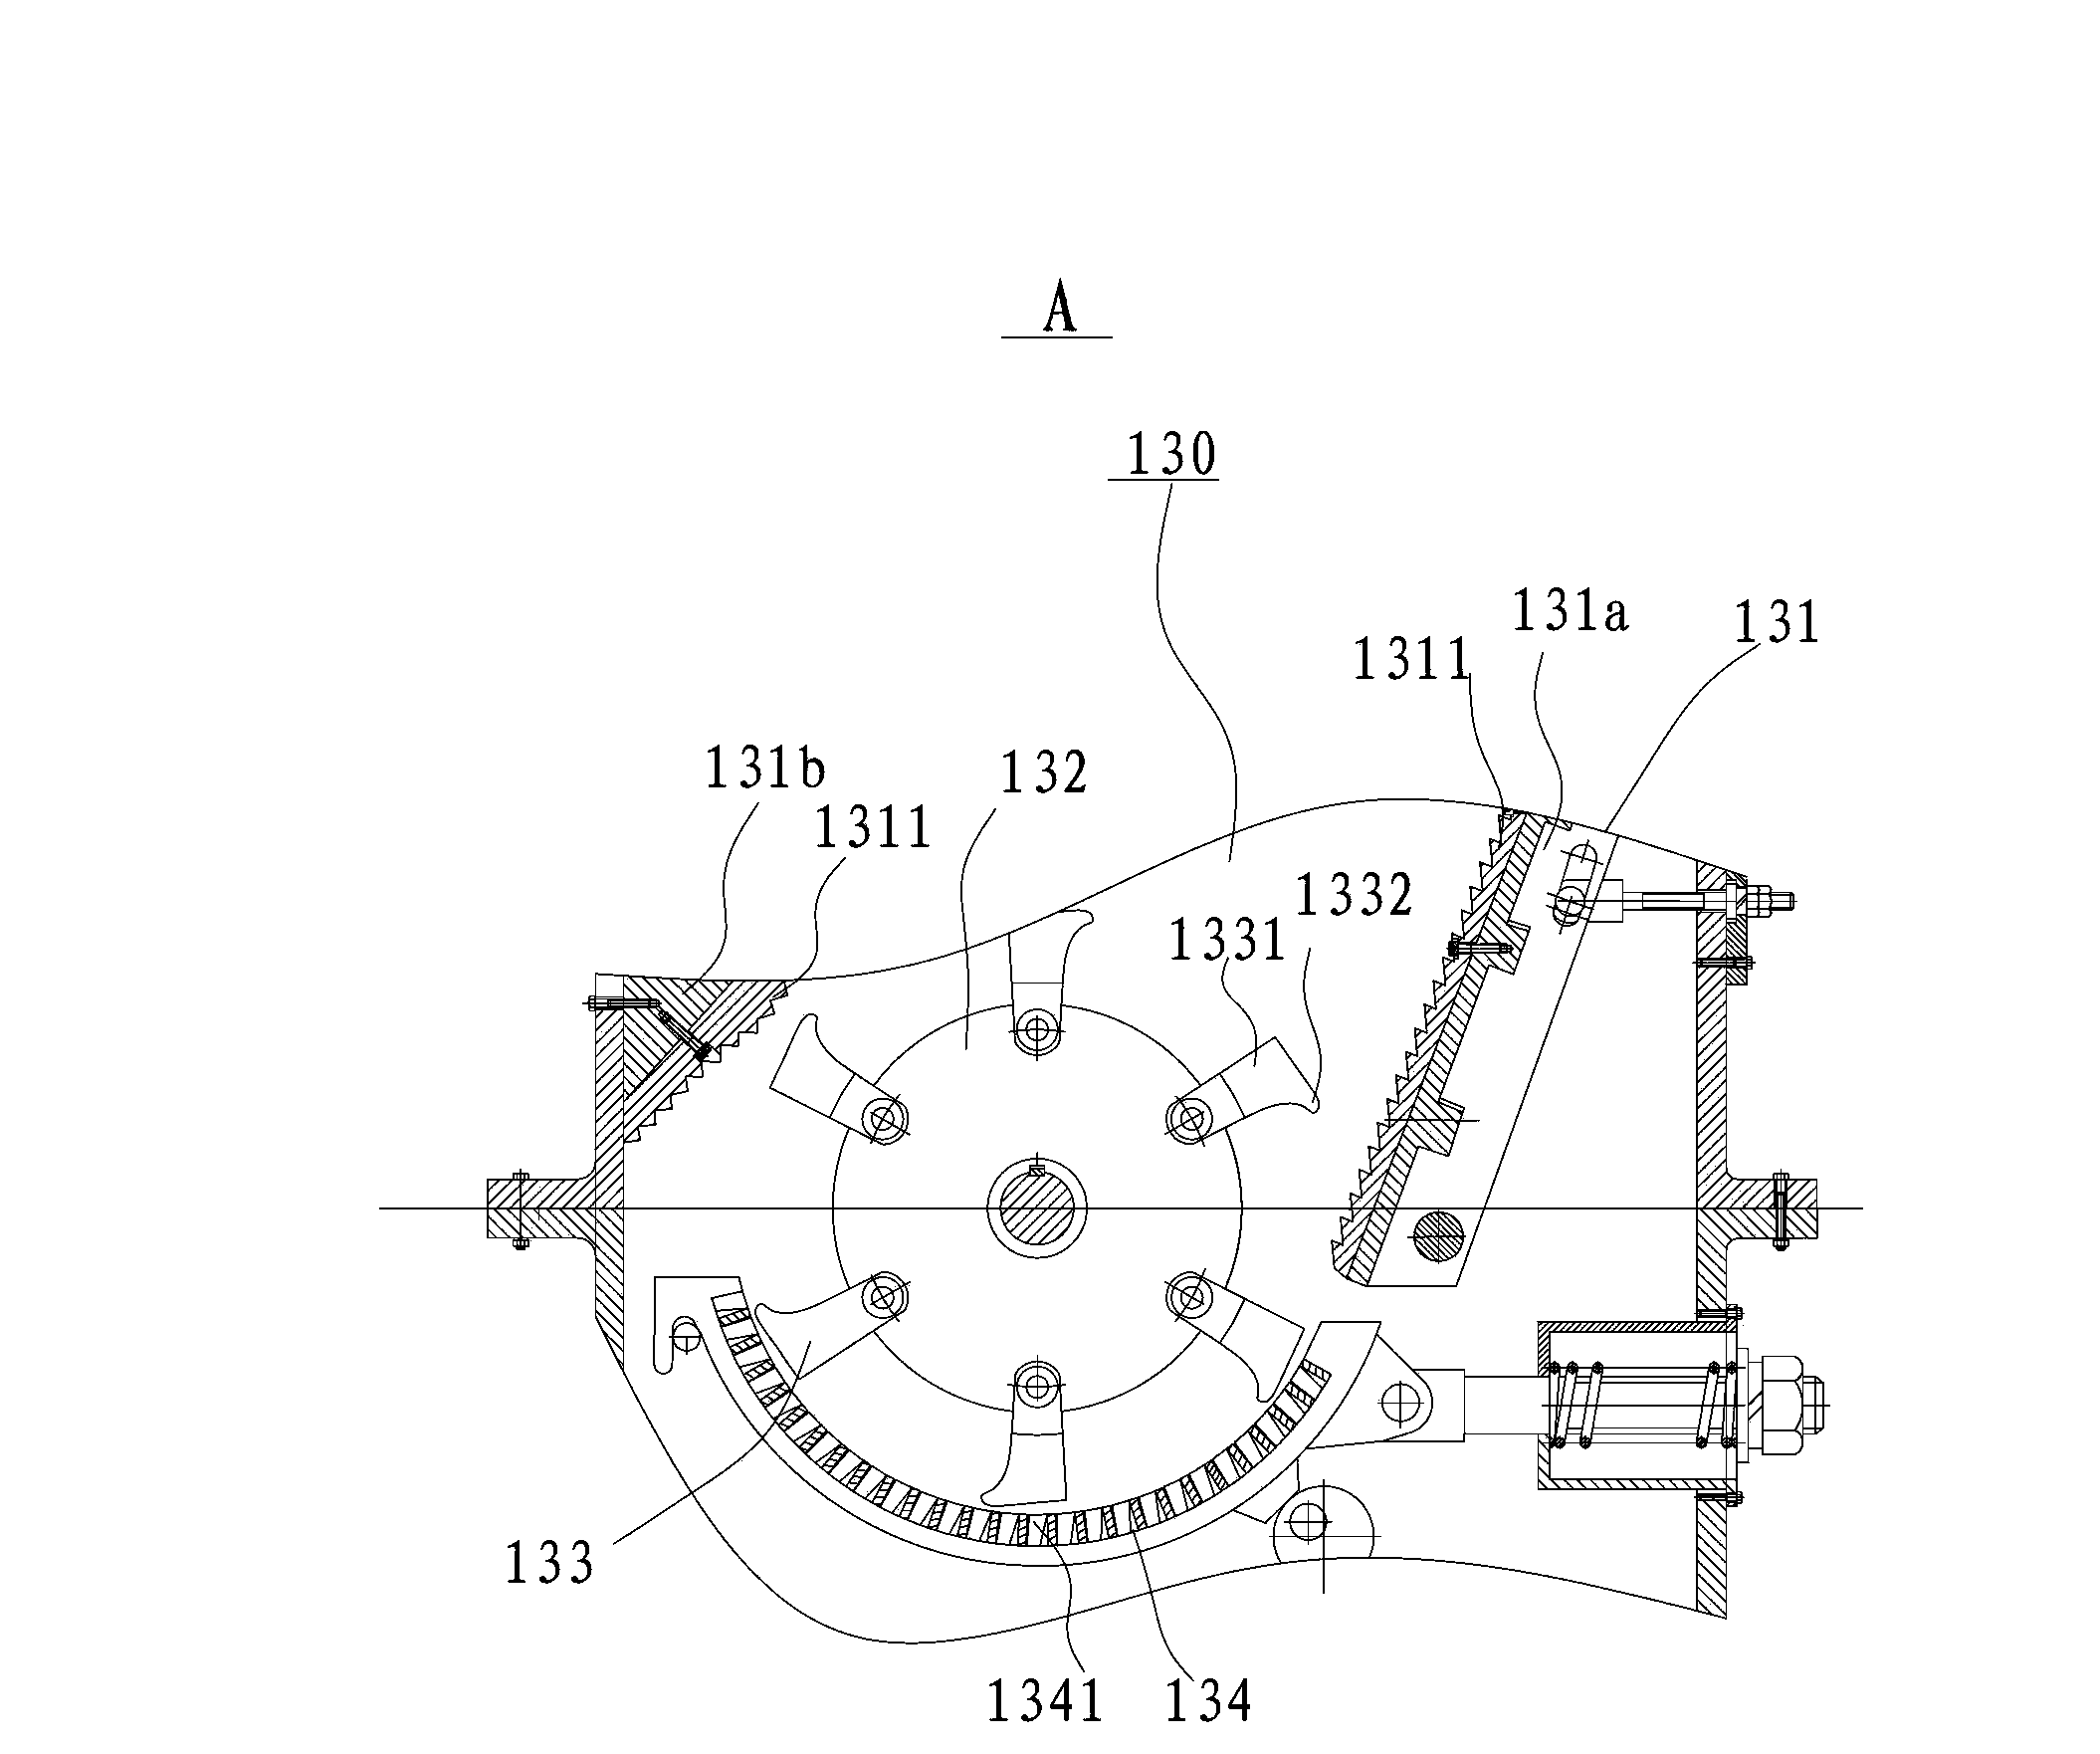 Treatment system and treatment method for waste lead-acid batteries